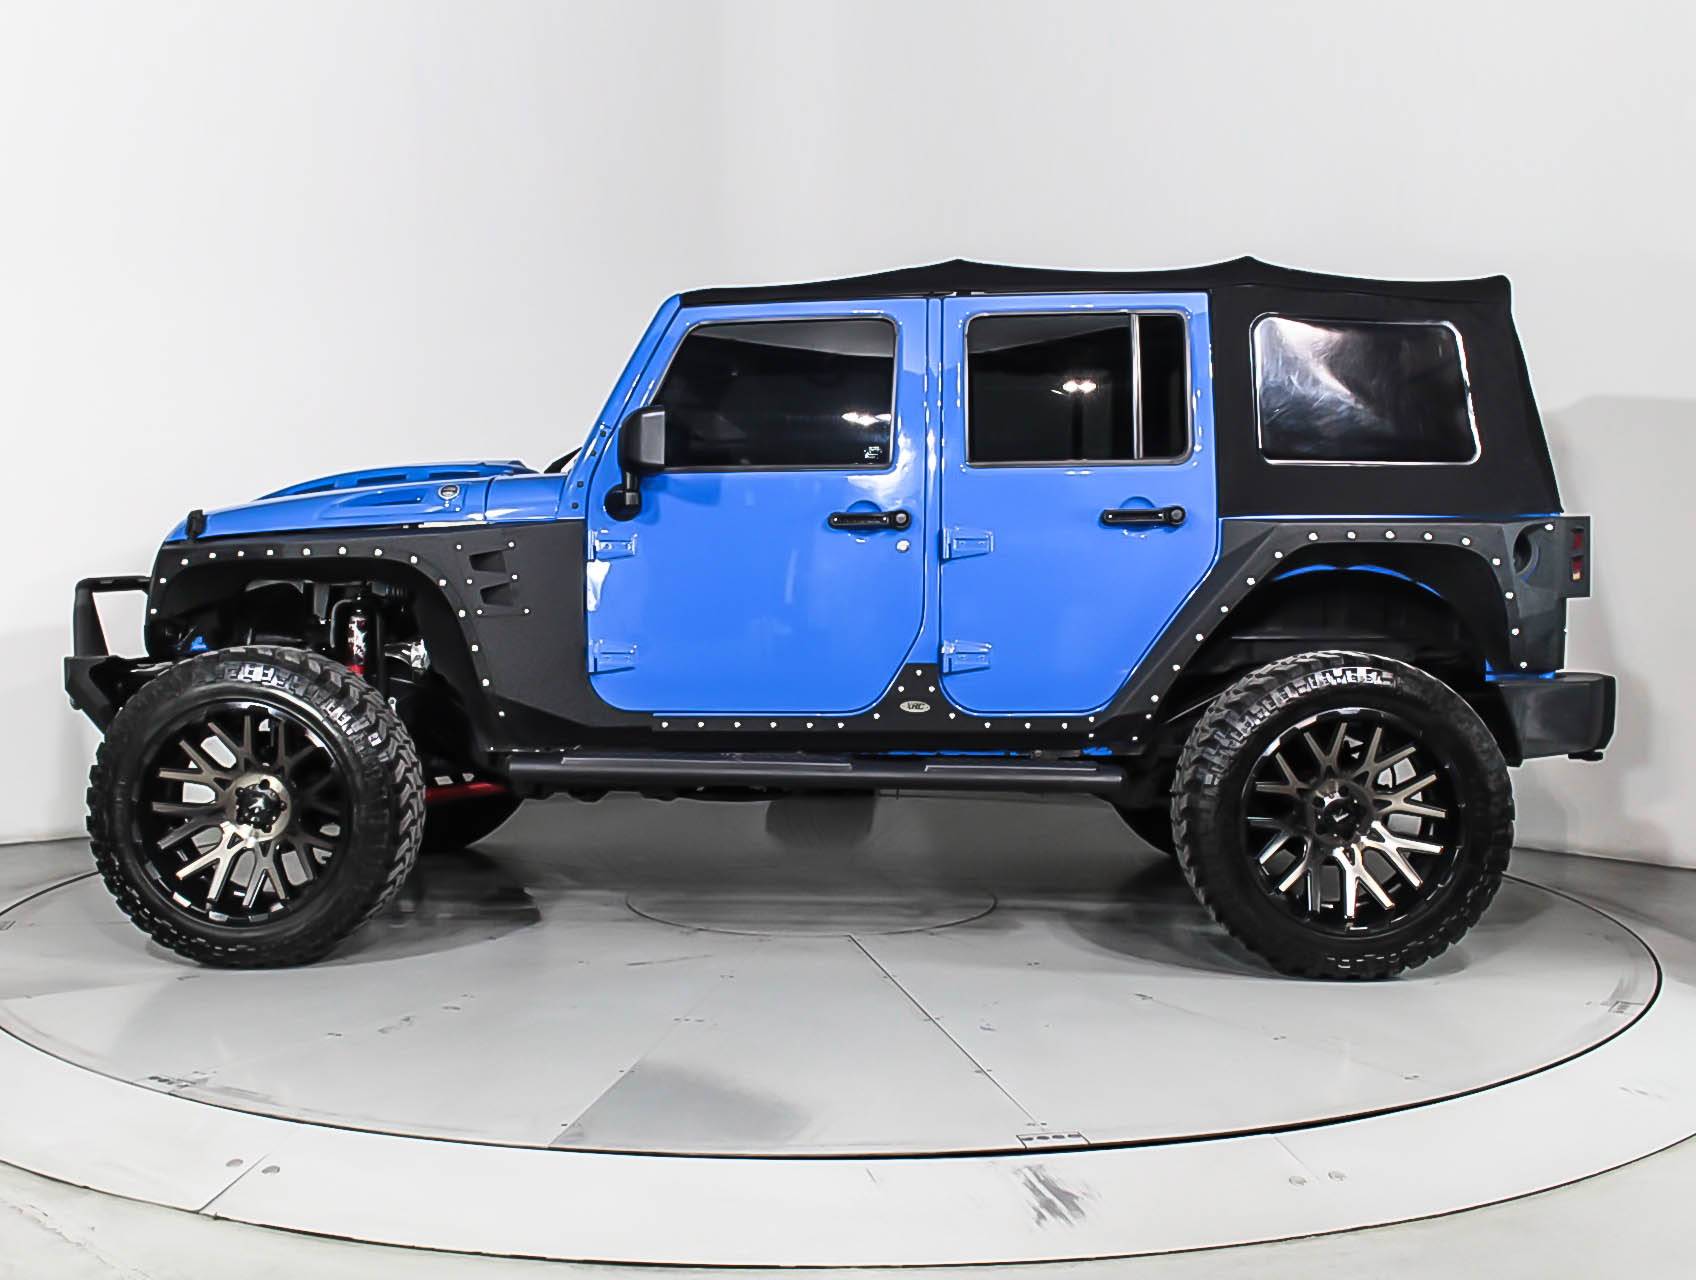 Used 2012 JEEP WRANGLER UNLIMITED SAHARA for sale in MIAMI | 98750